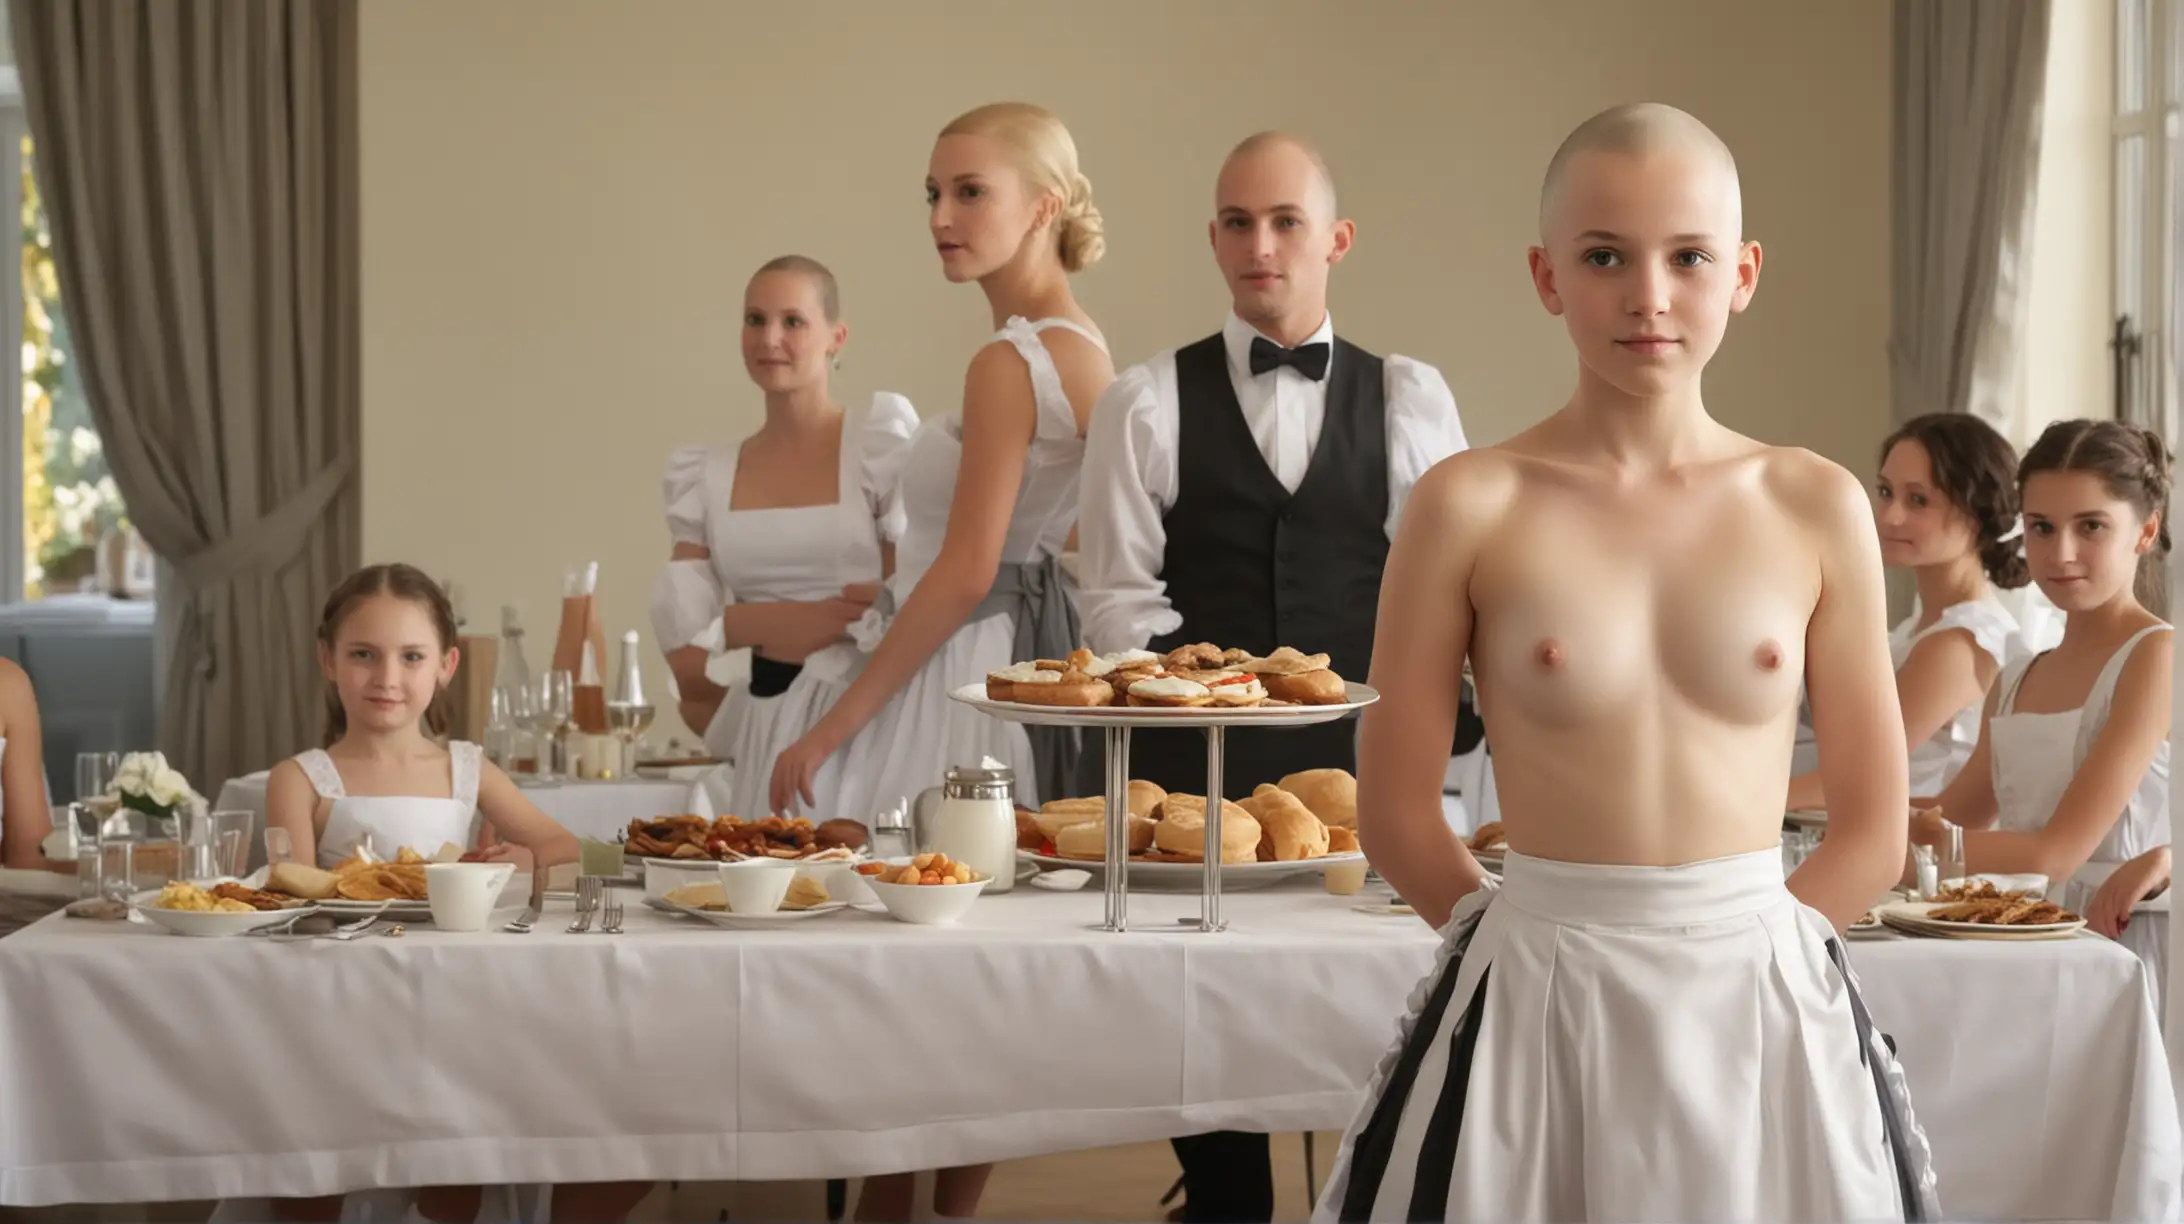 Hyperrealistic image: A bald, topless in a maids skirt, flat-chested 10-year-old waitress, wedding party,  standing at a table with guests and serving them food, full frontal